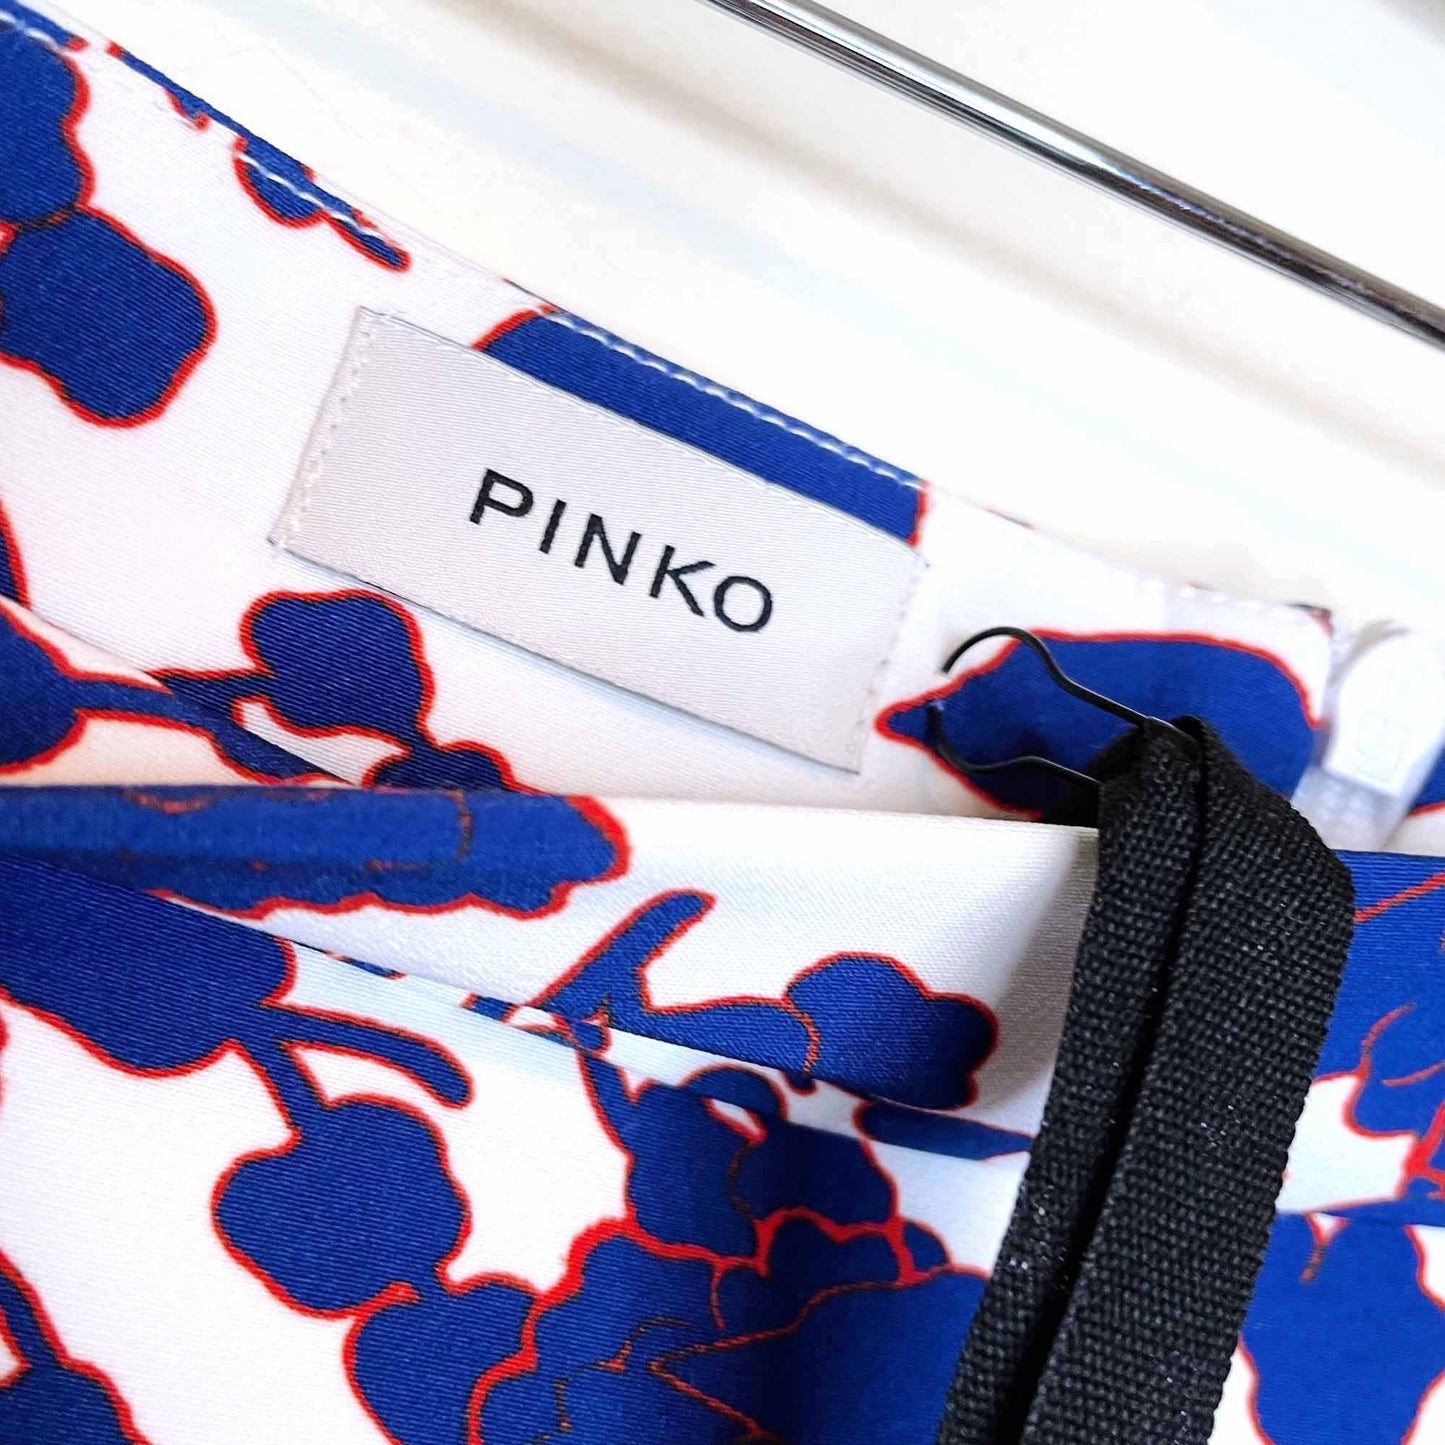 nwt pinko rapito blue red floral high rise pencil skirt - size 10